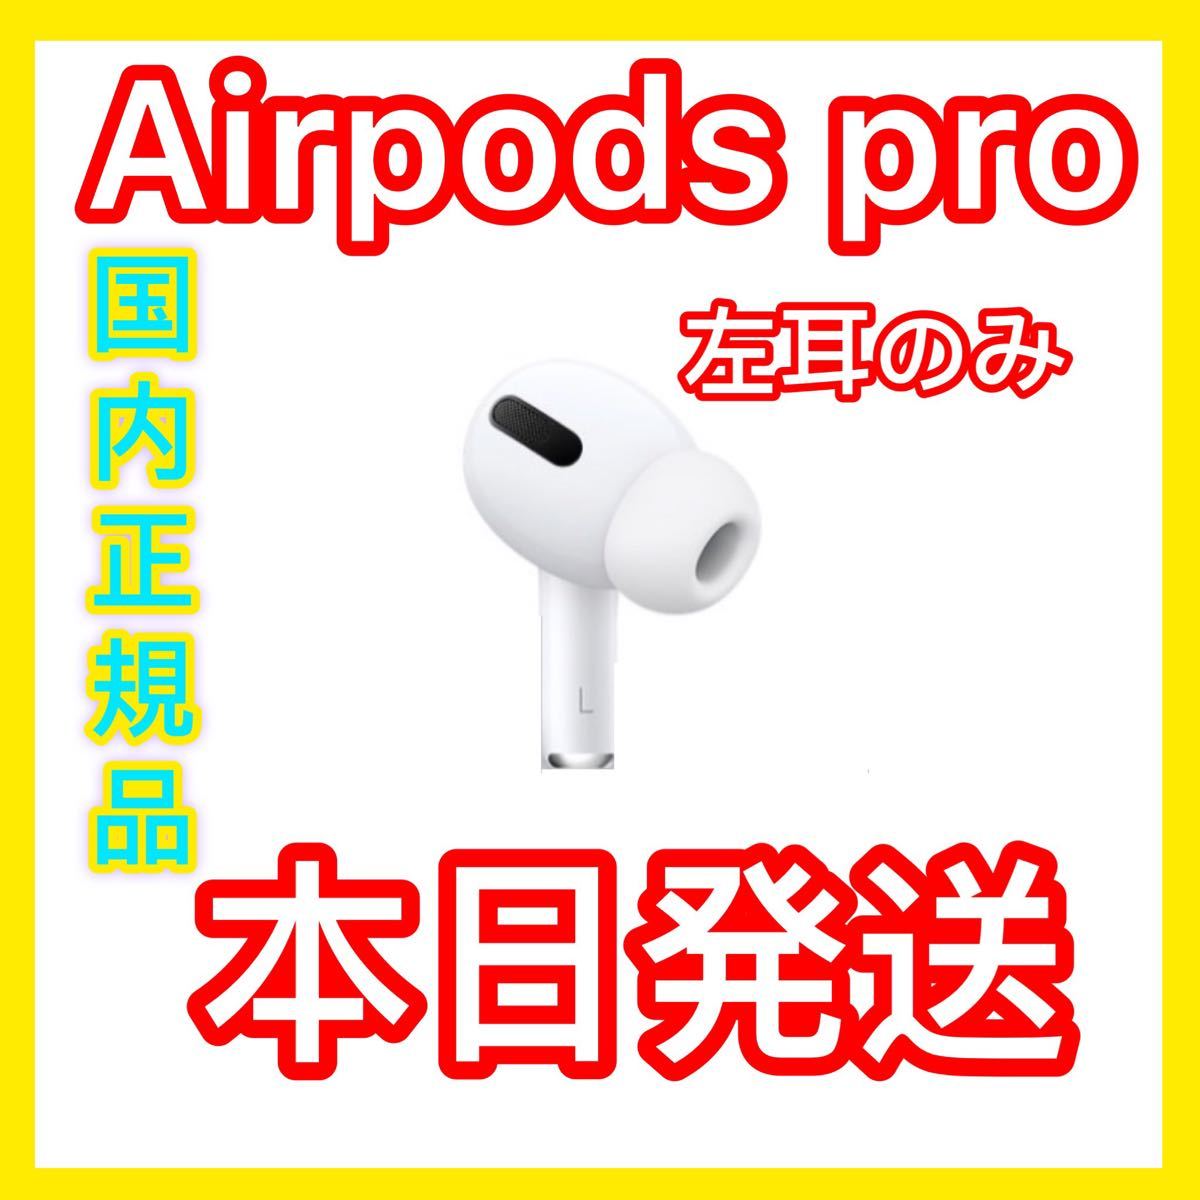 AirPods Pro エアーポッズ AirPodsPro 左耳のみ プロ L片耳のみ イヤホン Apple イヤフォン